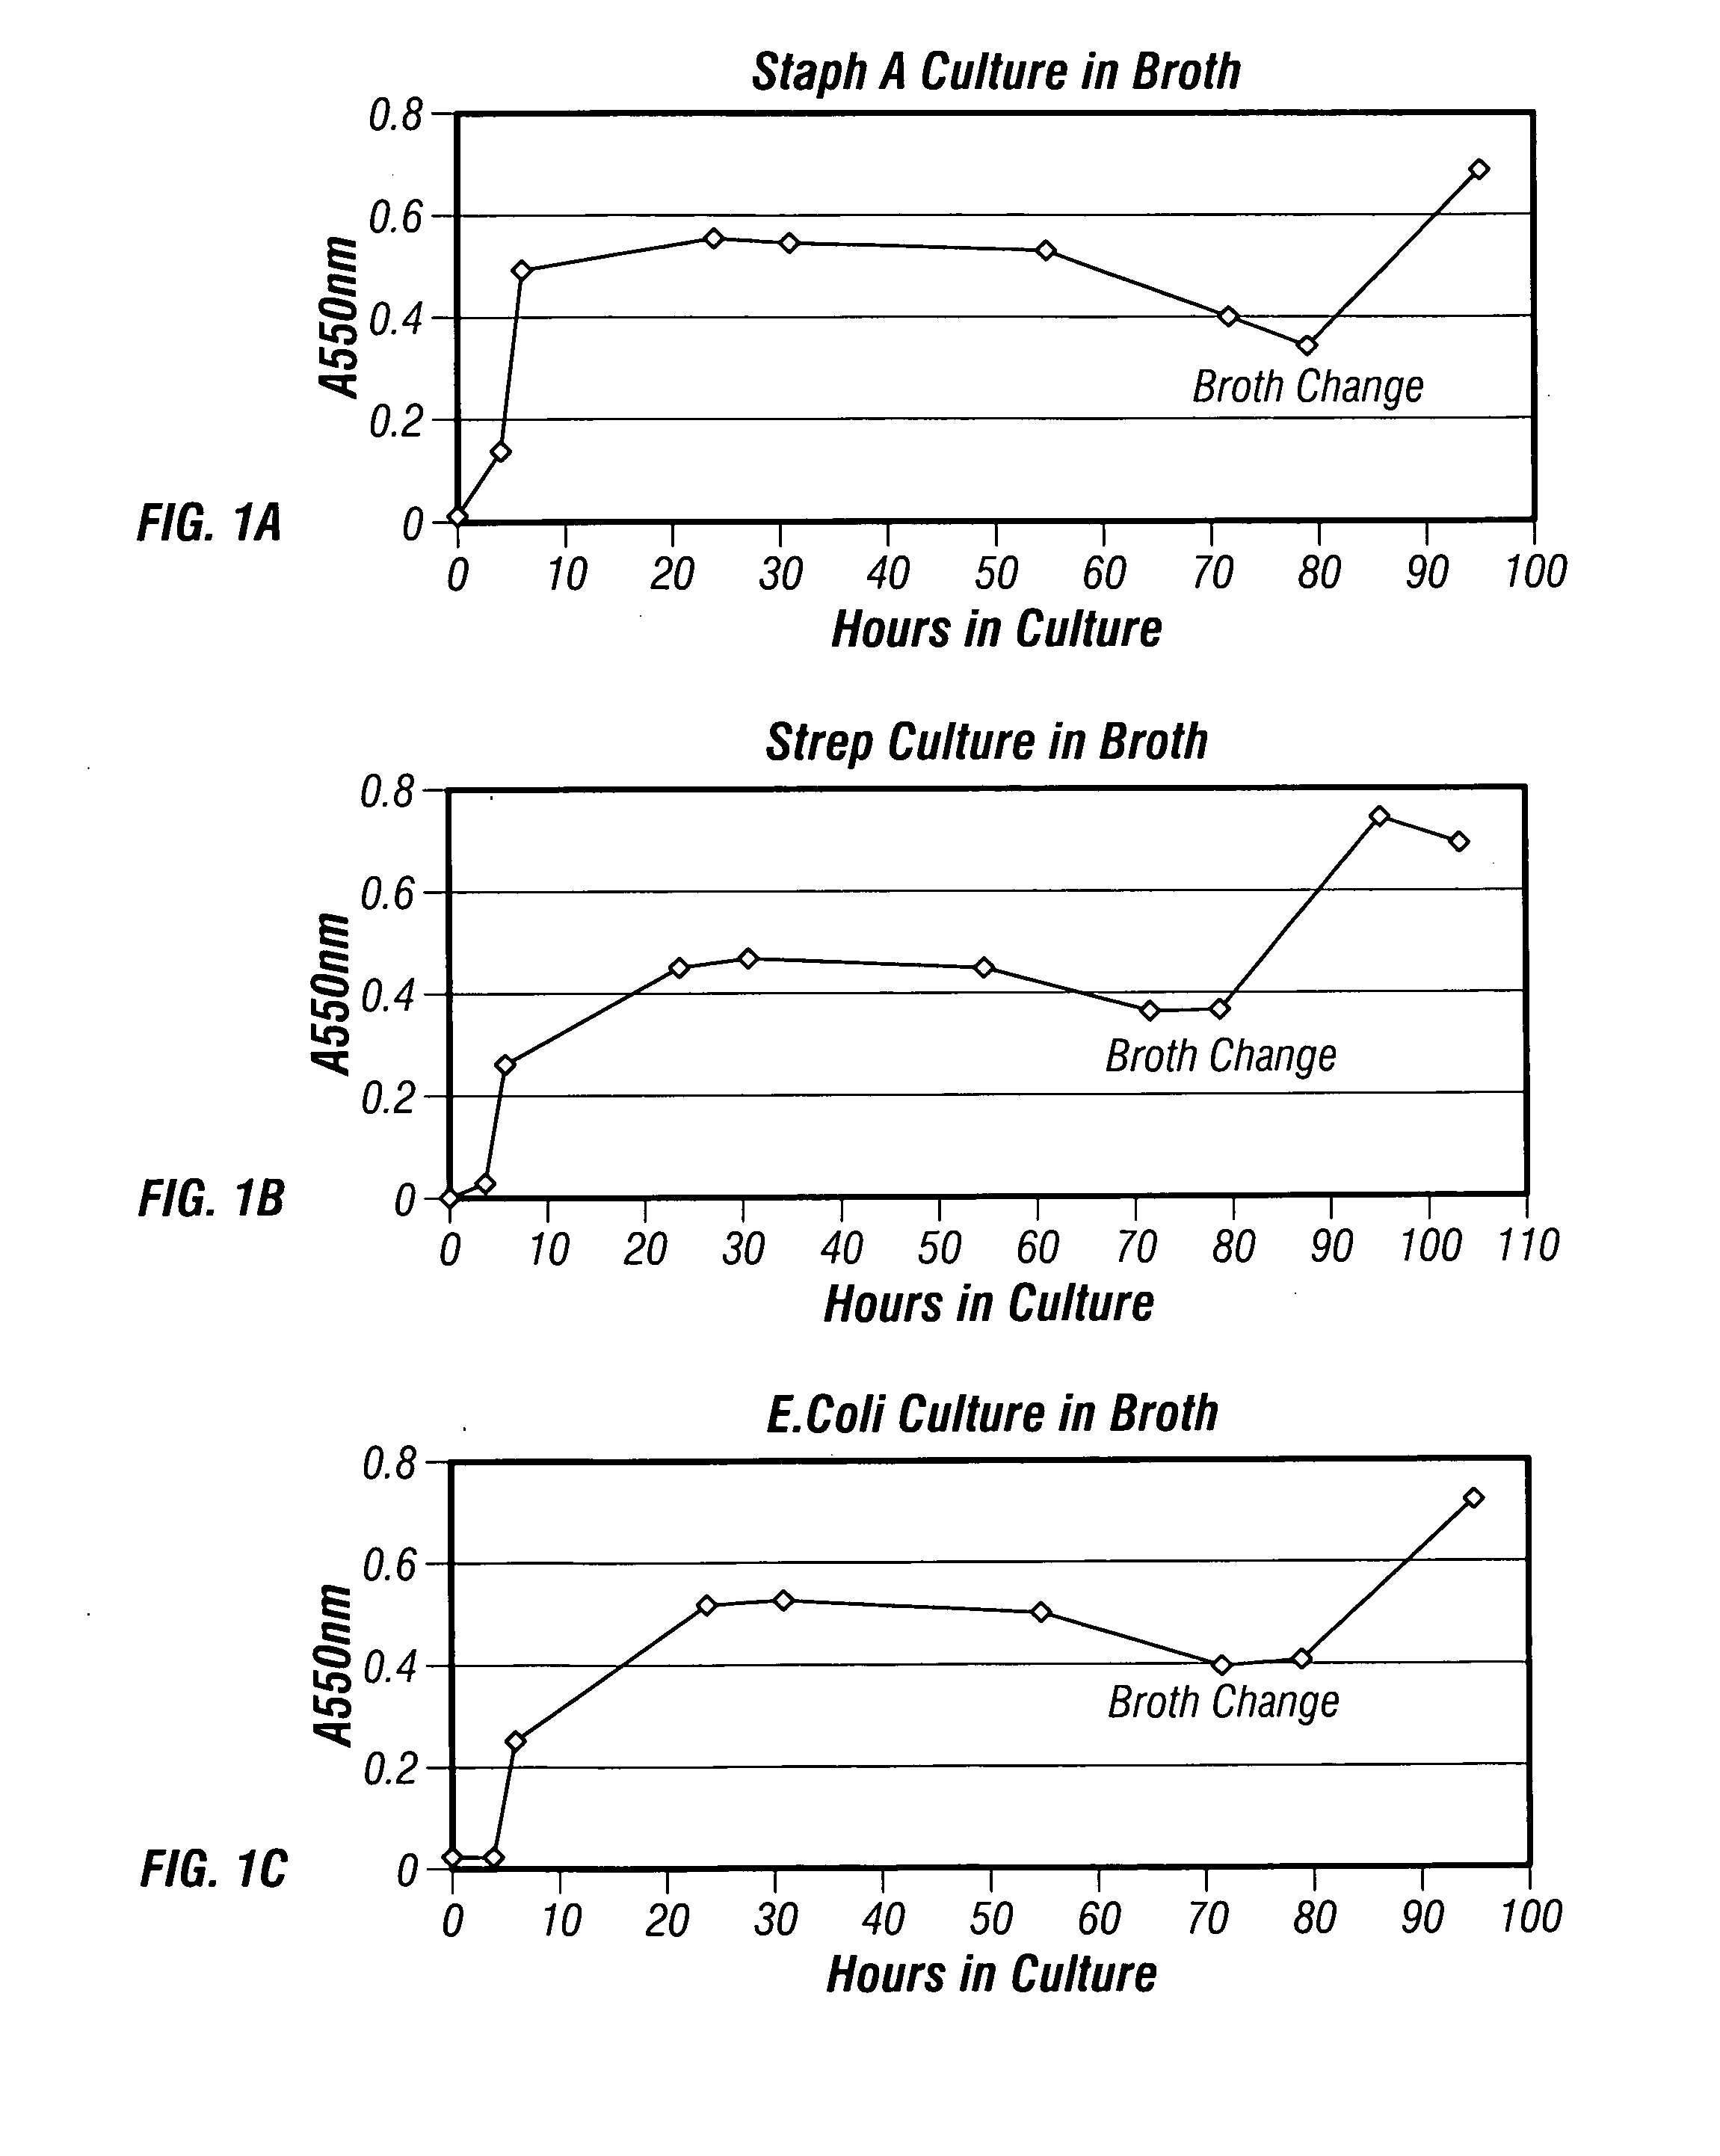 Affinity purified human polyclonal antibodies and methods of making and using them